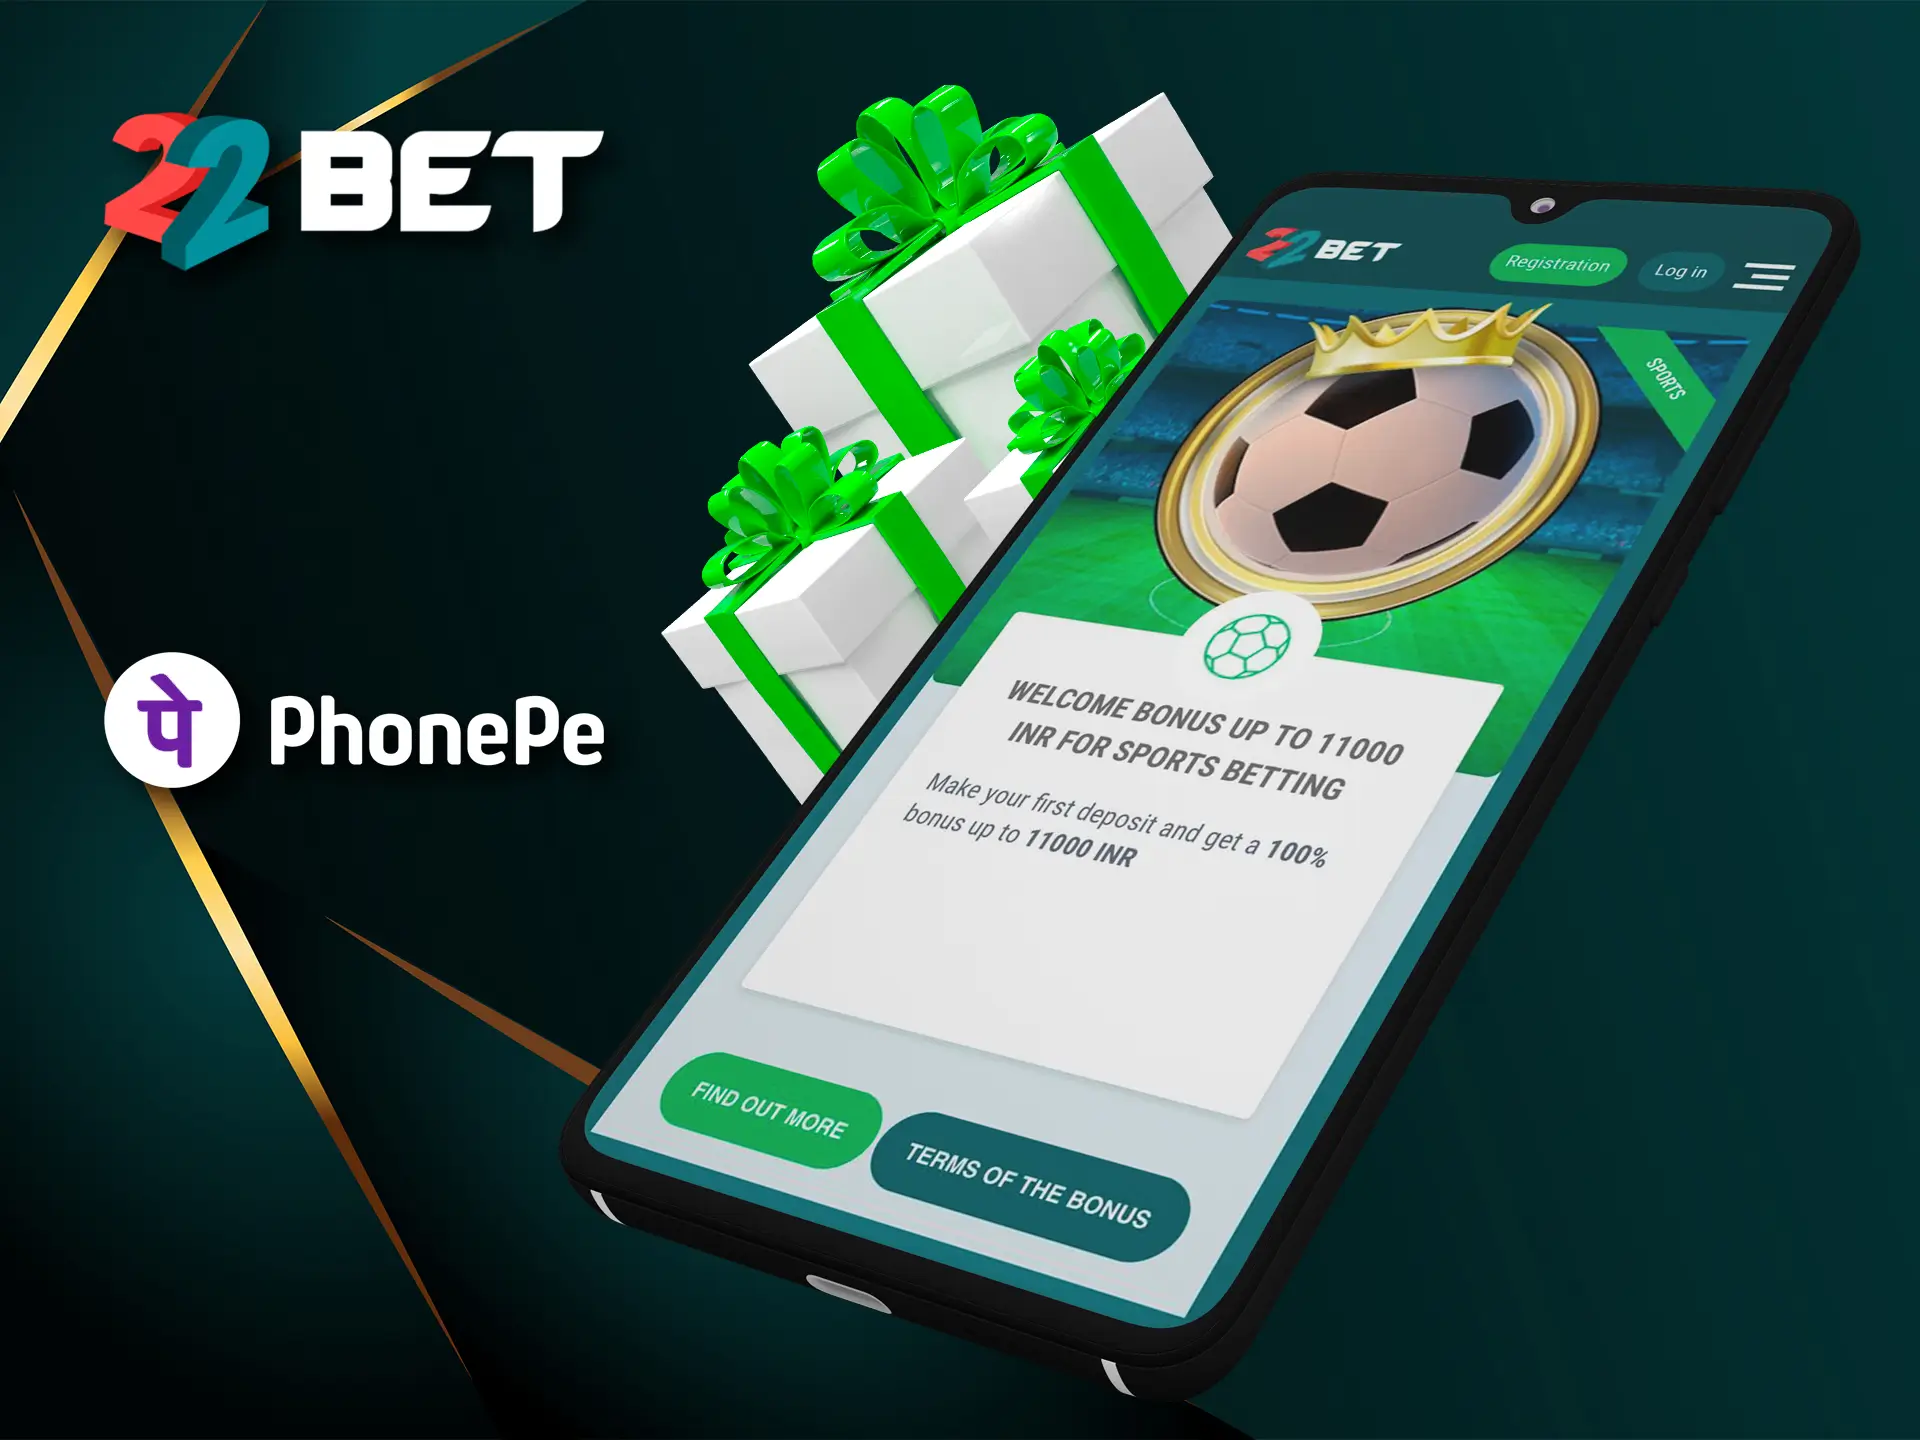 22Bet is known by many users for whom withdrawal via PhonePe is a priority.